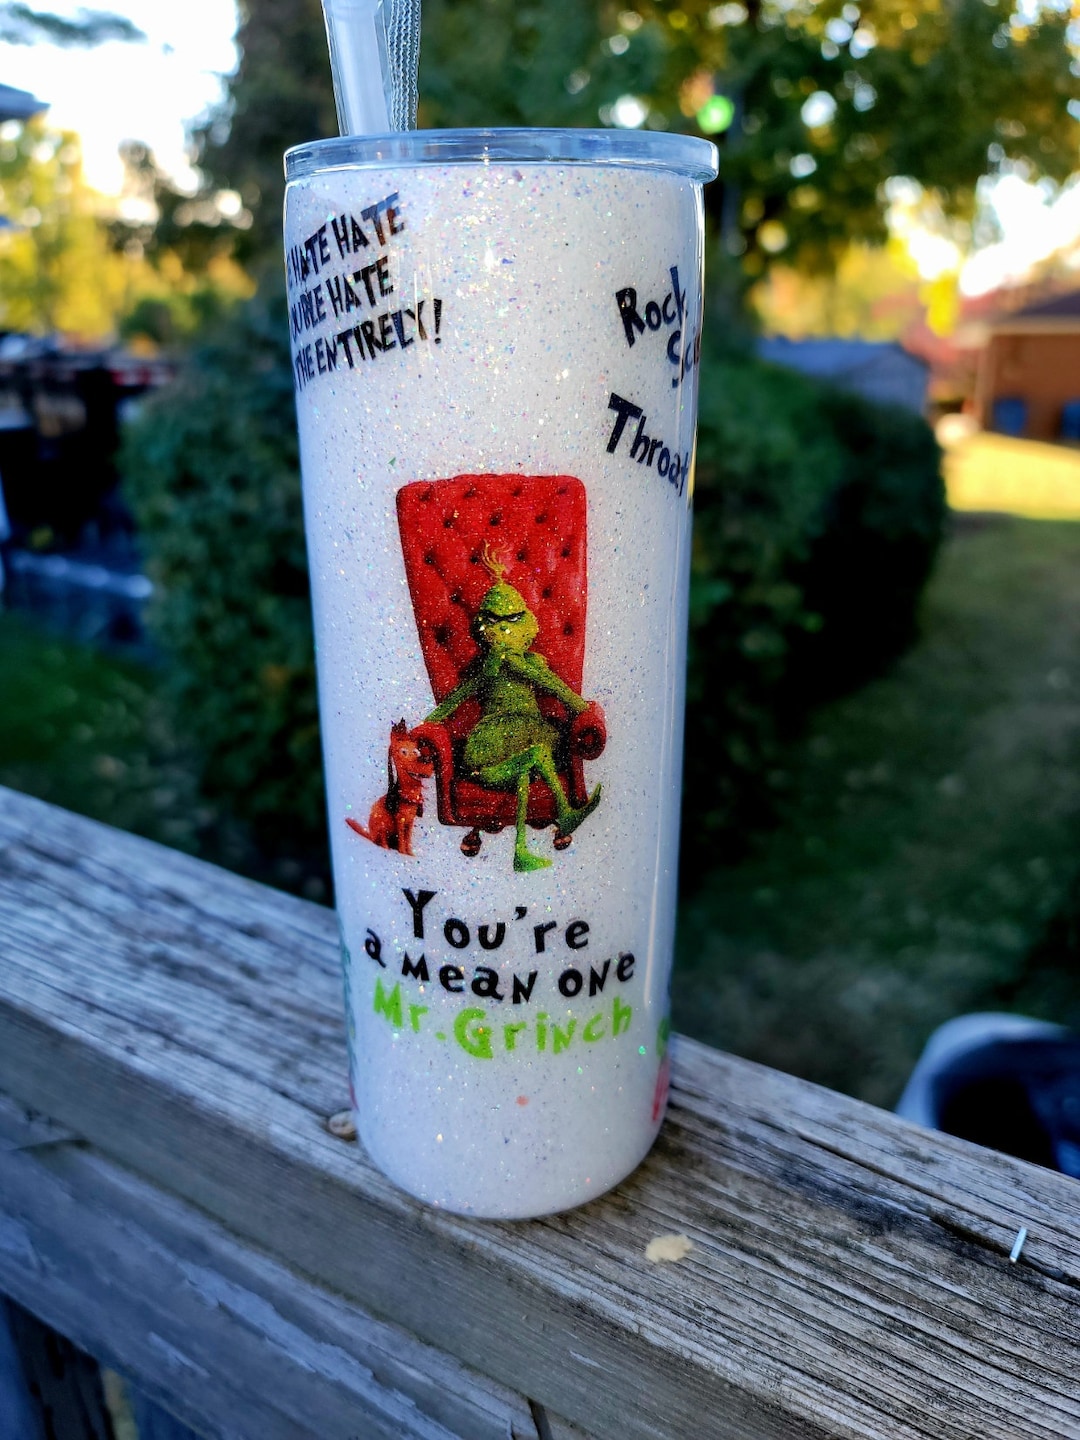 The Grinch His Heart Grew Three Sizes 16 Oz. Acrylic Cup with Straw and  Reusable Ice Molds